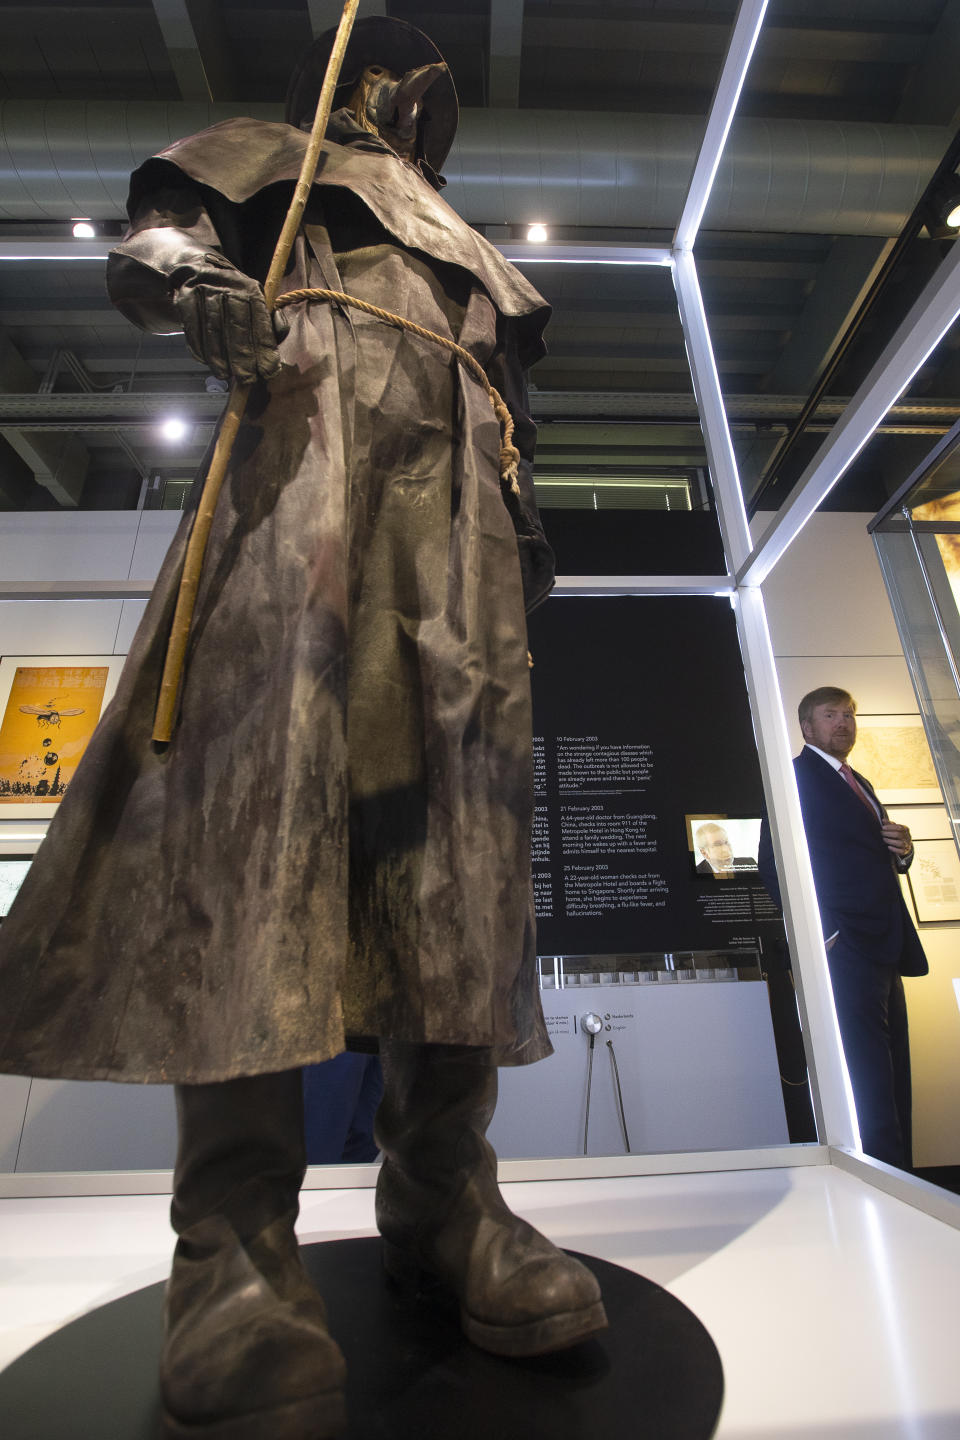 Dutch King Willem-Alexander, rear right, looks at a replica of a plague doctor's long robe as he tours the "Contagious!" exhibit at Rijksmuseum Boerhave in Leiden, Netherlands, Thursday, July 16, 2020. The museum finally opened an exhibition Thursday on contagious diseases through the ages after a long delay caused by the disease currently sweeping the world, COVID-19. (AP Photo/Peter Dejong, Pool)